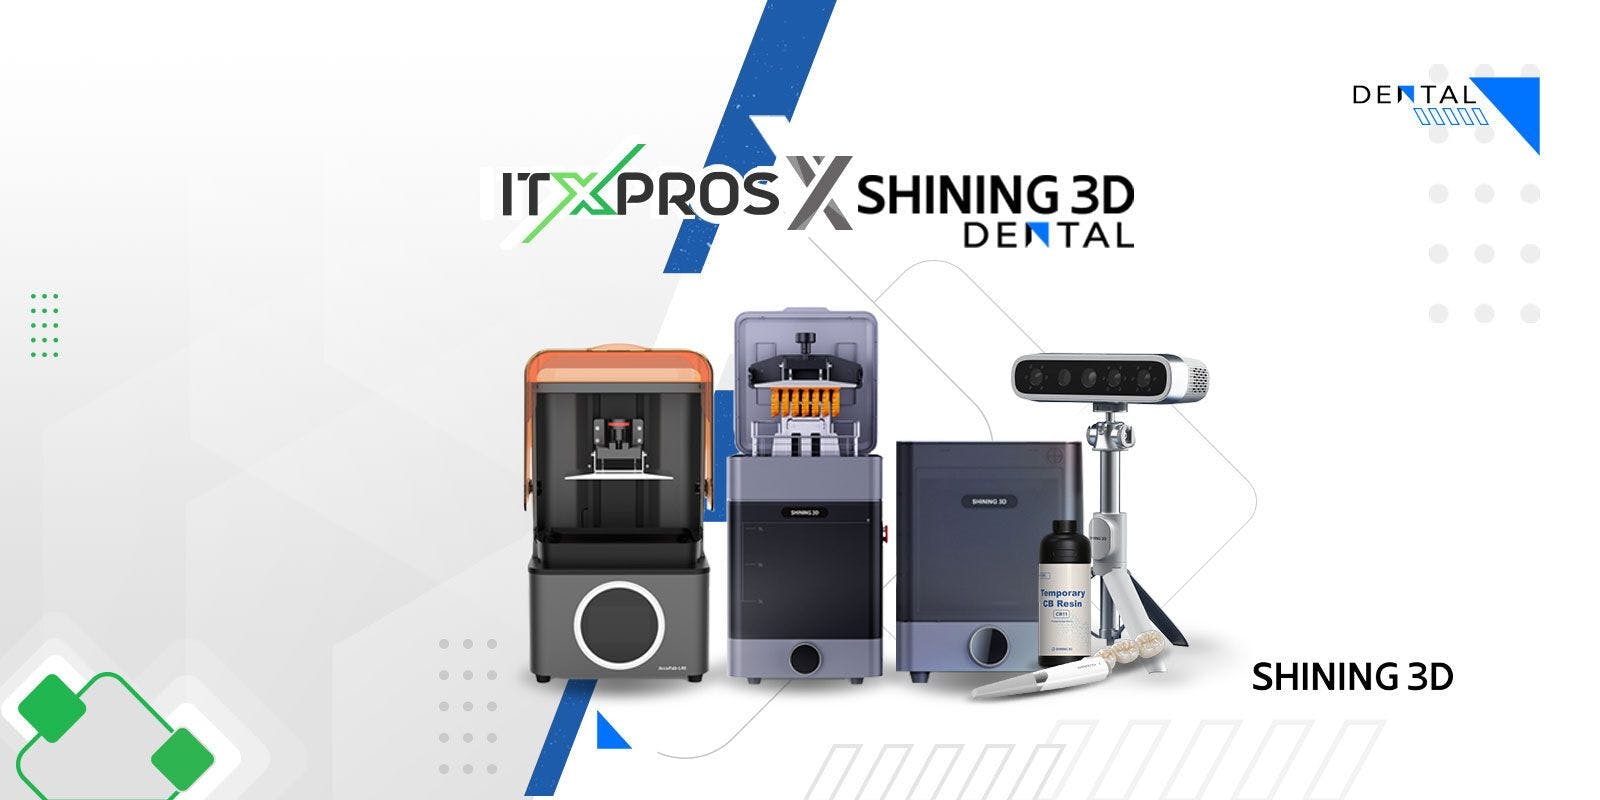 SHINING3D, ITXPROS Announce Partnership and Plans to Distribute Digital Dentistry Solutions | Image Credit: © ITXPROS and SHINING3D